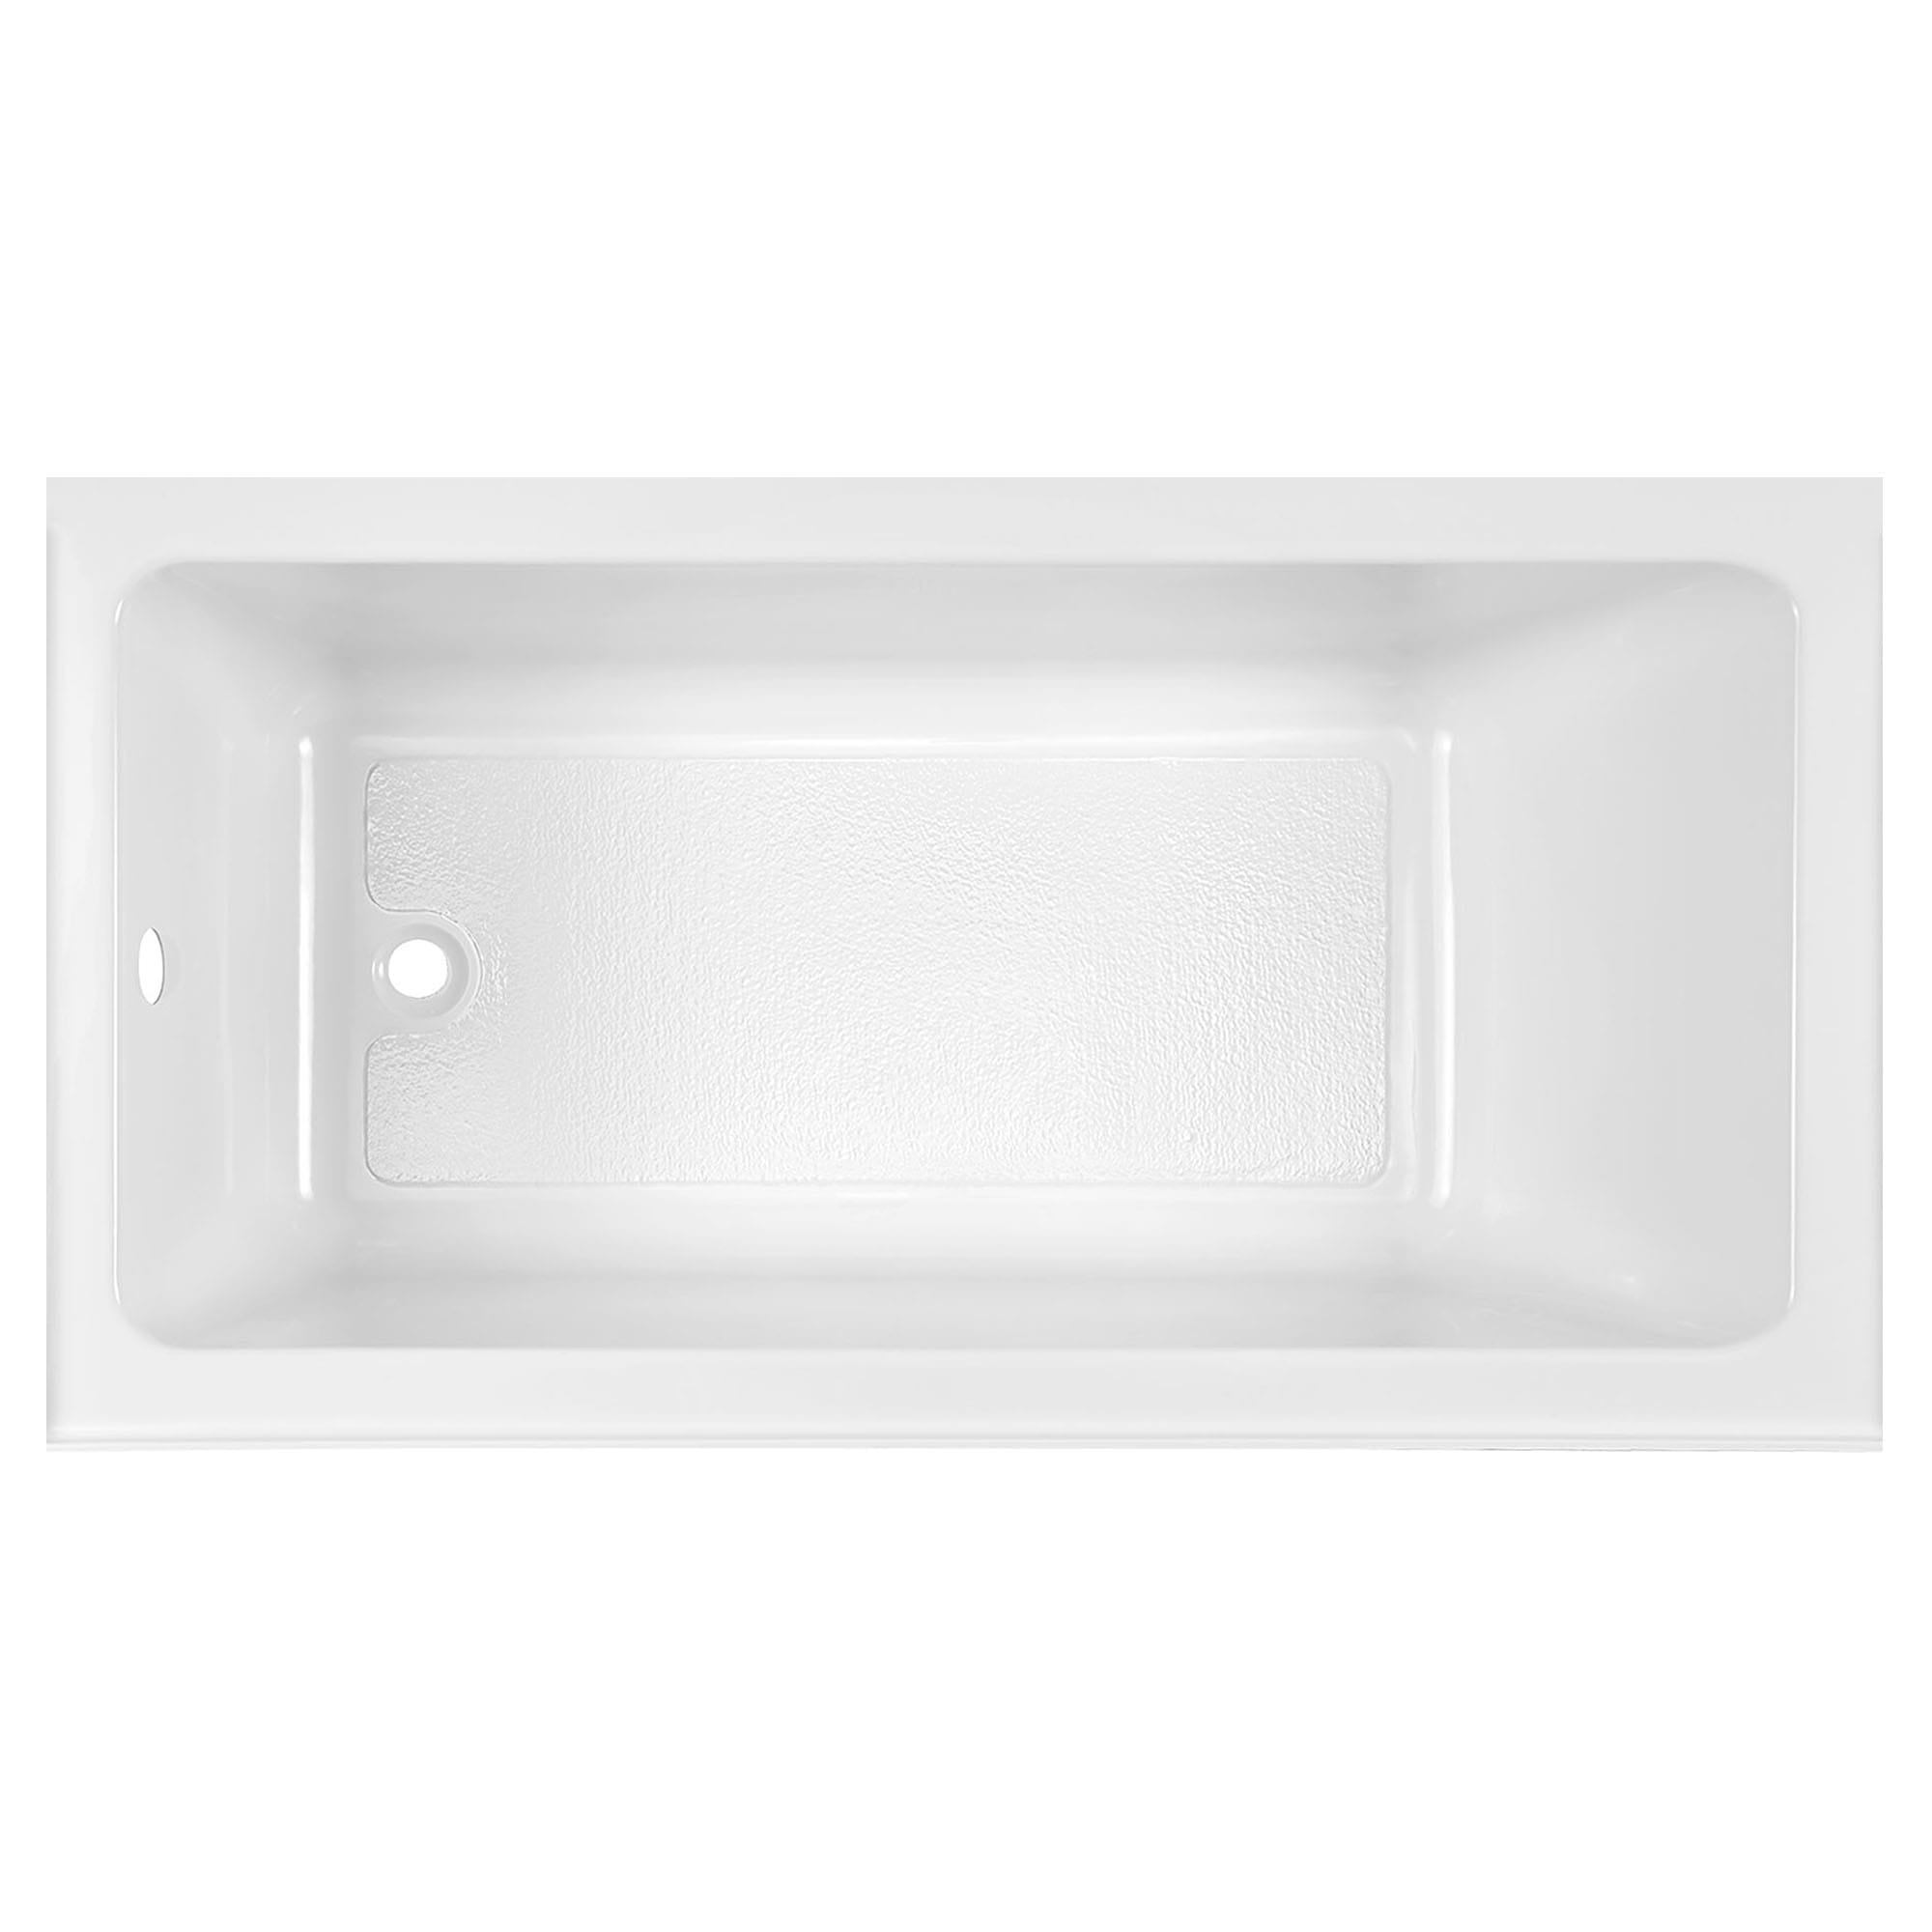 Studio 60 x 30 Inch Integral Apron Bathtub Above Floor Rough With Left Hand Outlet ARCTIC